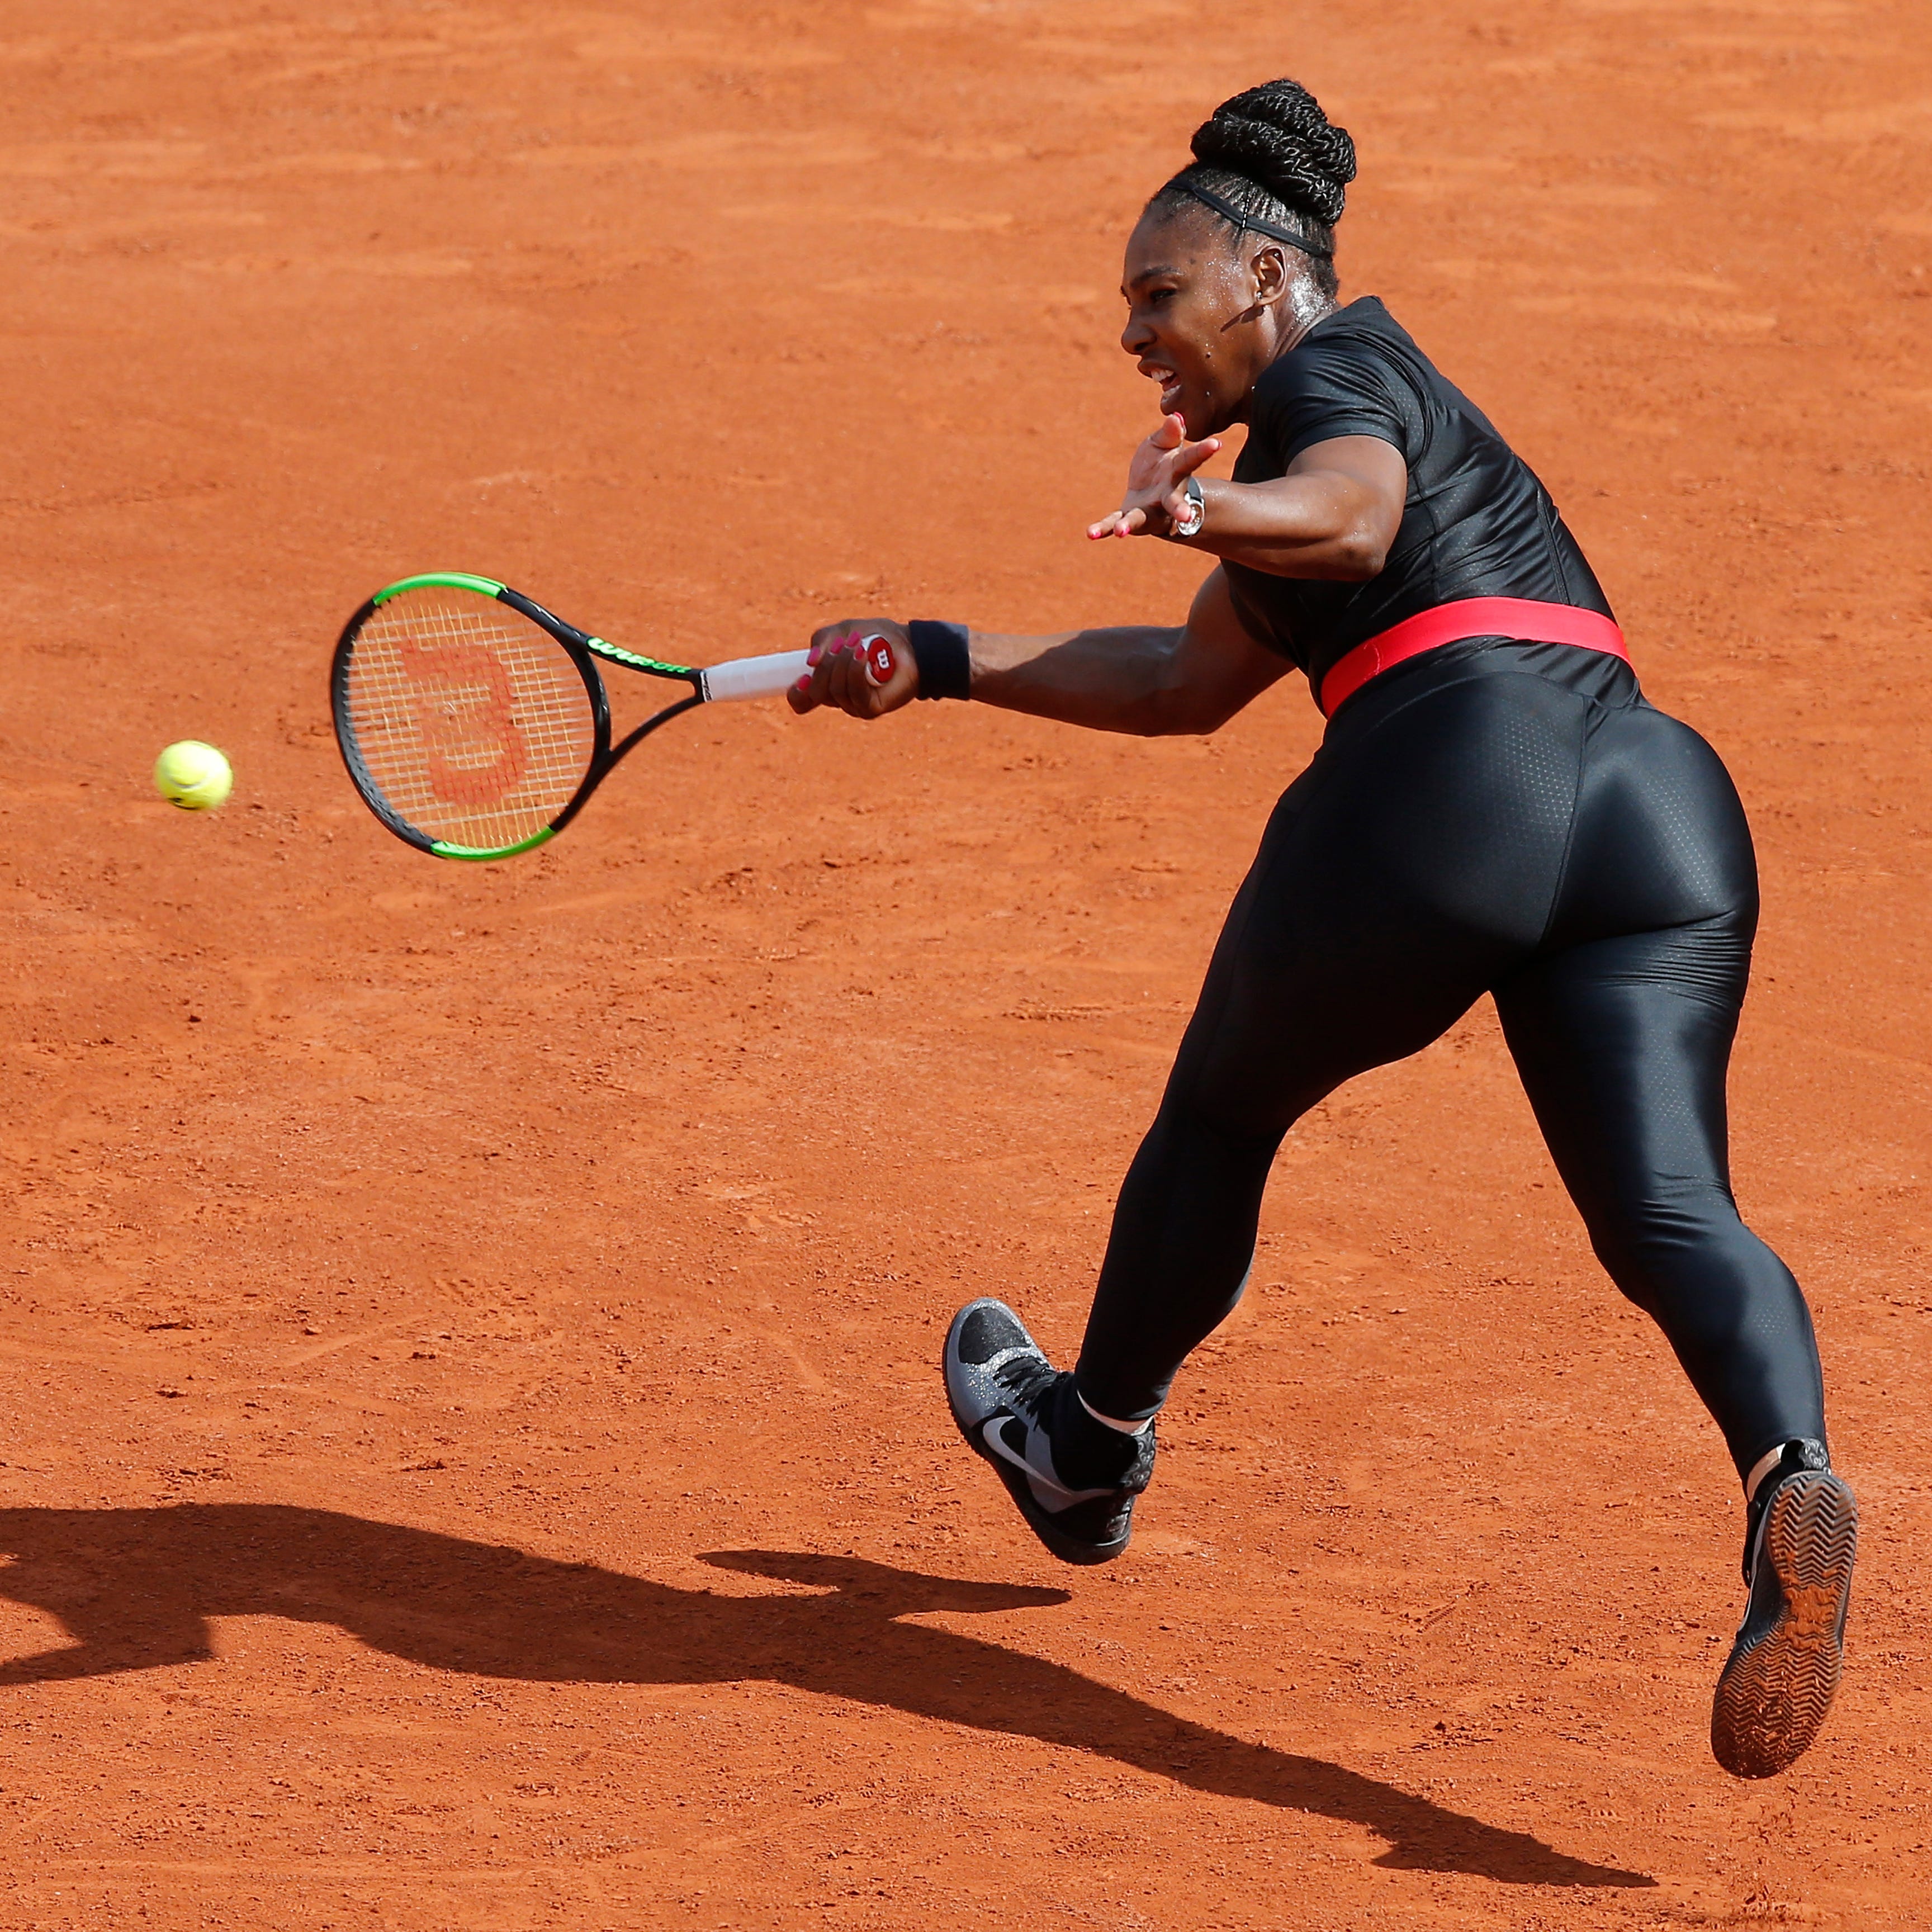 In this May 29, 2018 file photo, Serena Williams of the U.S. returns a shot against Krystyna Pliskova of the Czech Republic during their first round match of the French Open tennis tournament at the Roland Garros stadium in Paris. Serena Williams wil